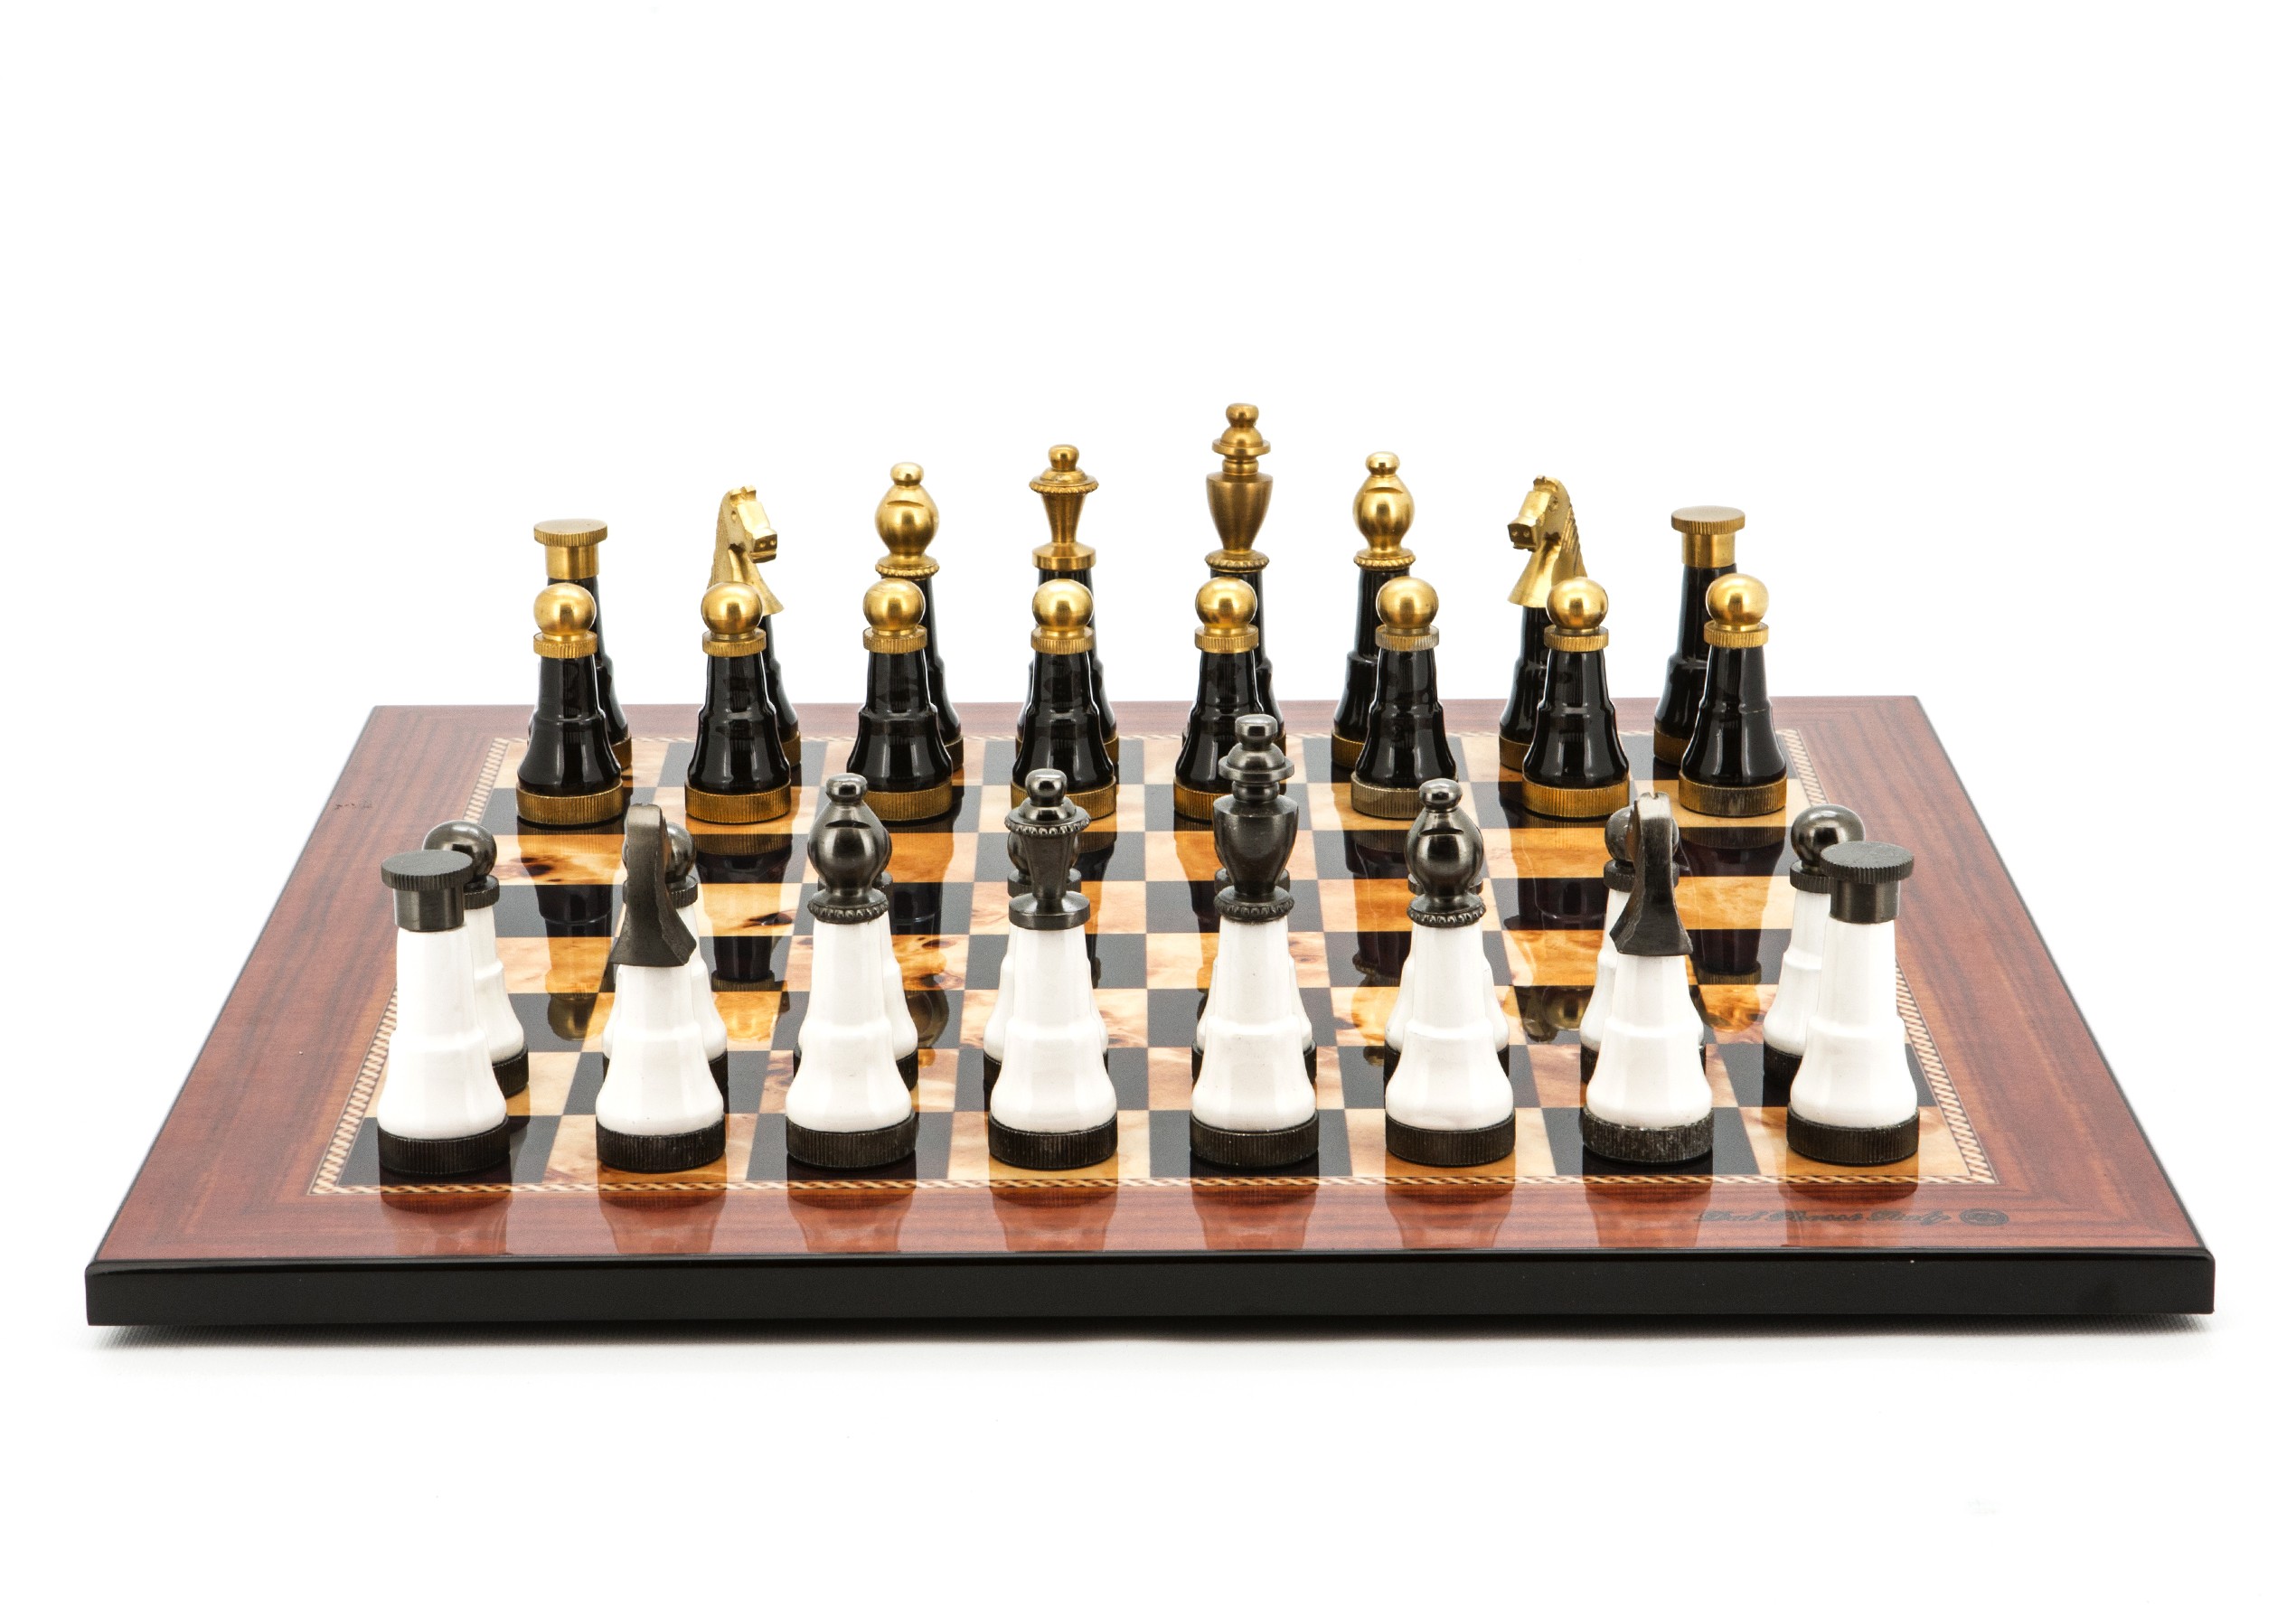 Dal Rossi Italy Chess Set Flat  Walnut Finish Board 50cm,With Black and White with Gold and Gun Metal Tops and Bottoms Chessmen 110mm